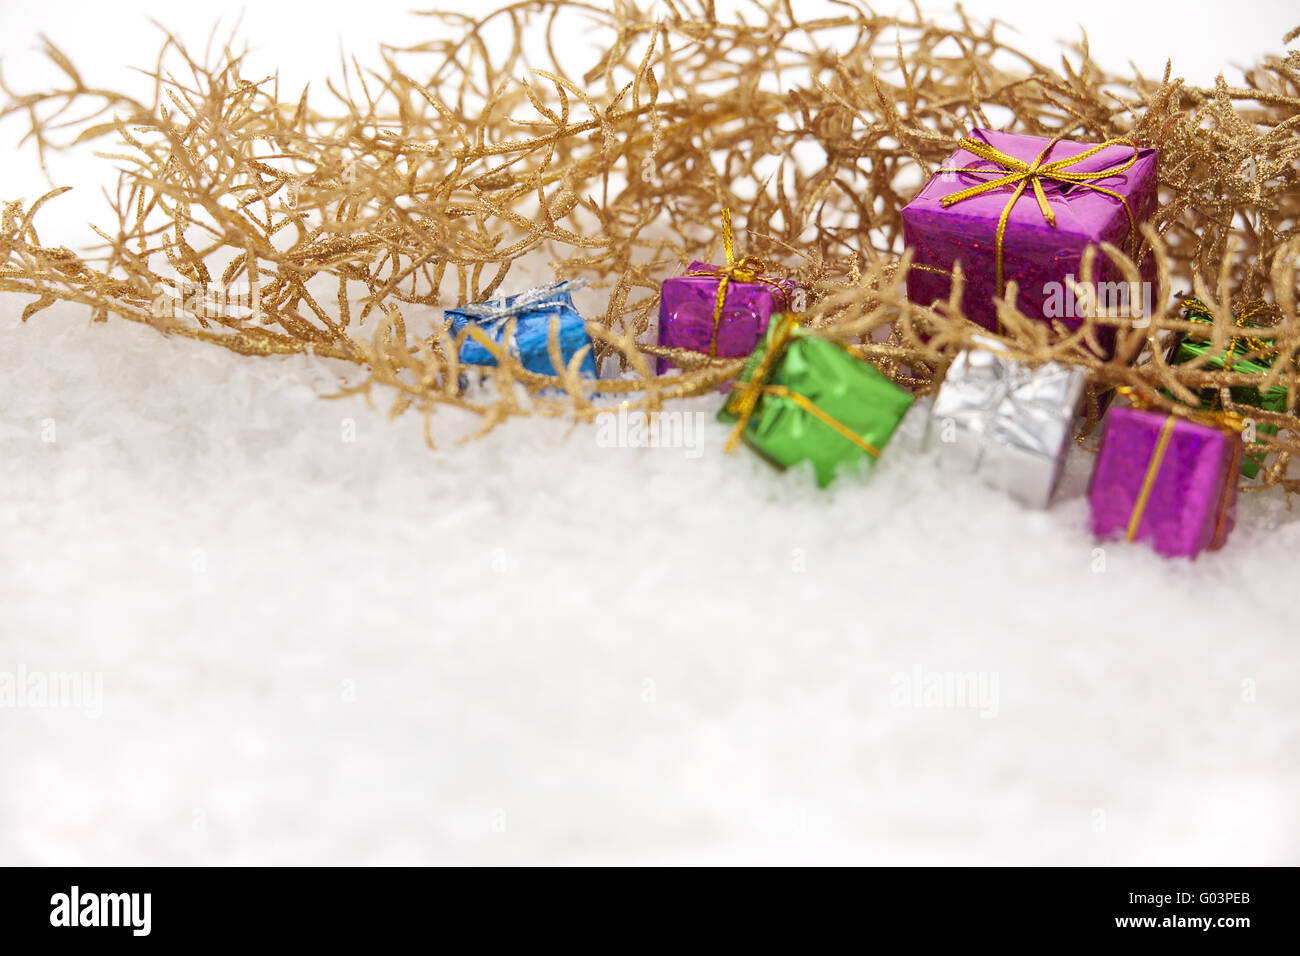 Golden Christmas decorations and gifts with snow Stock Photo